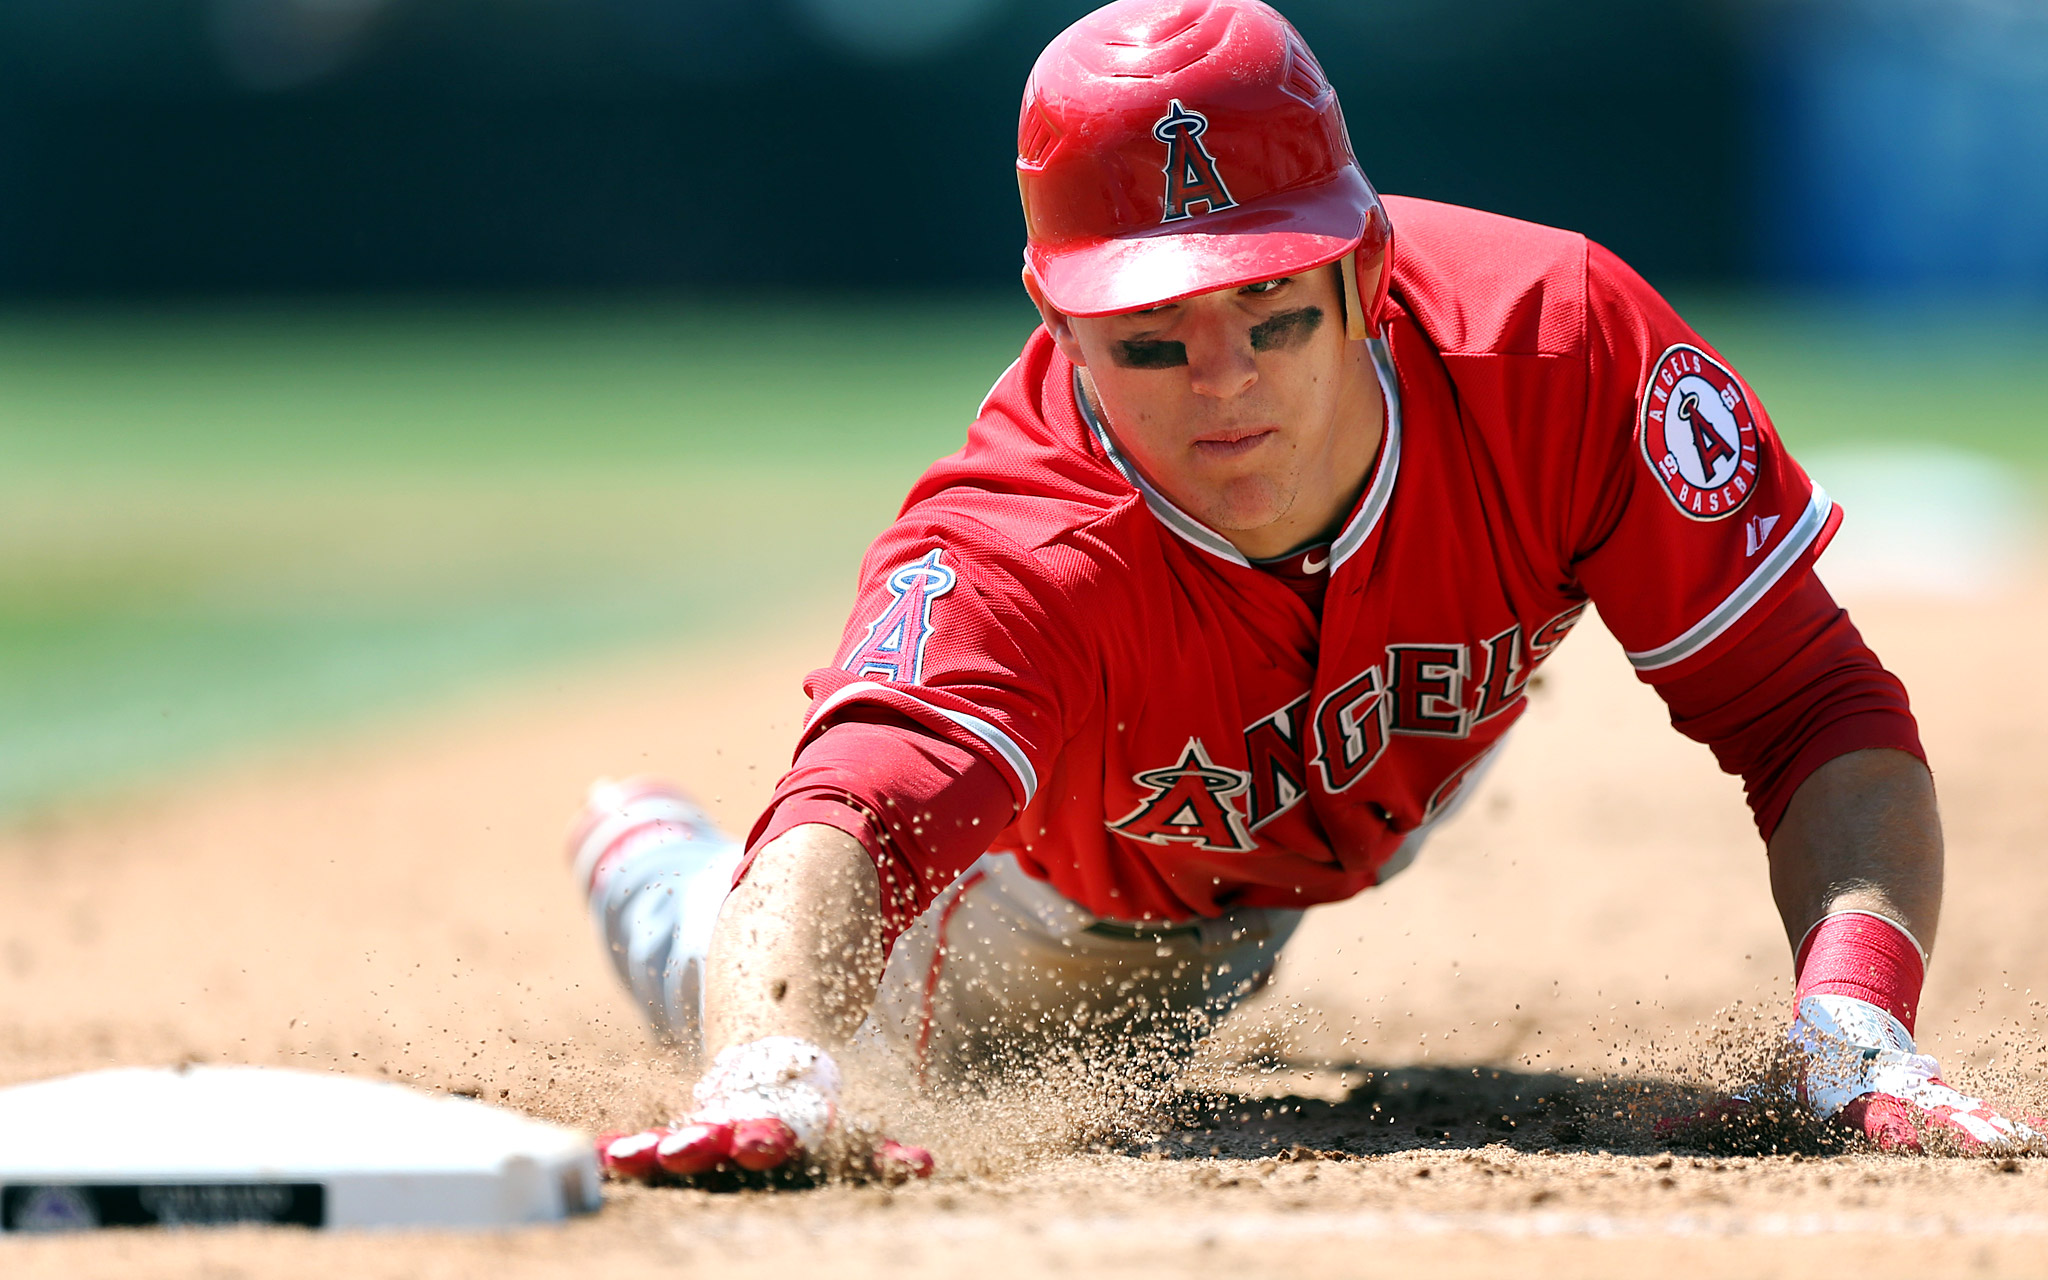 Trout underpaid as result of faulty statistic